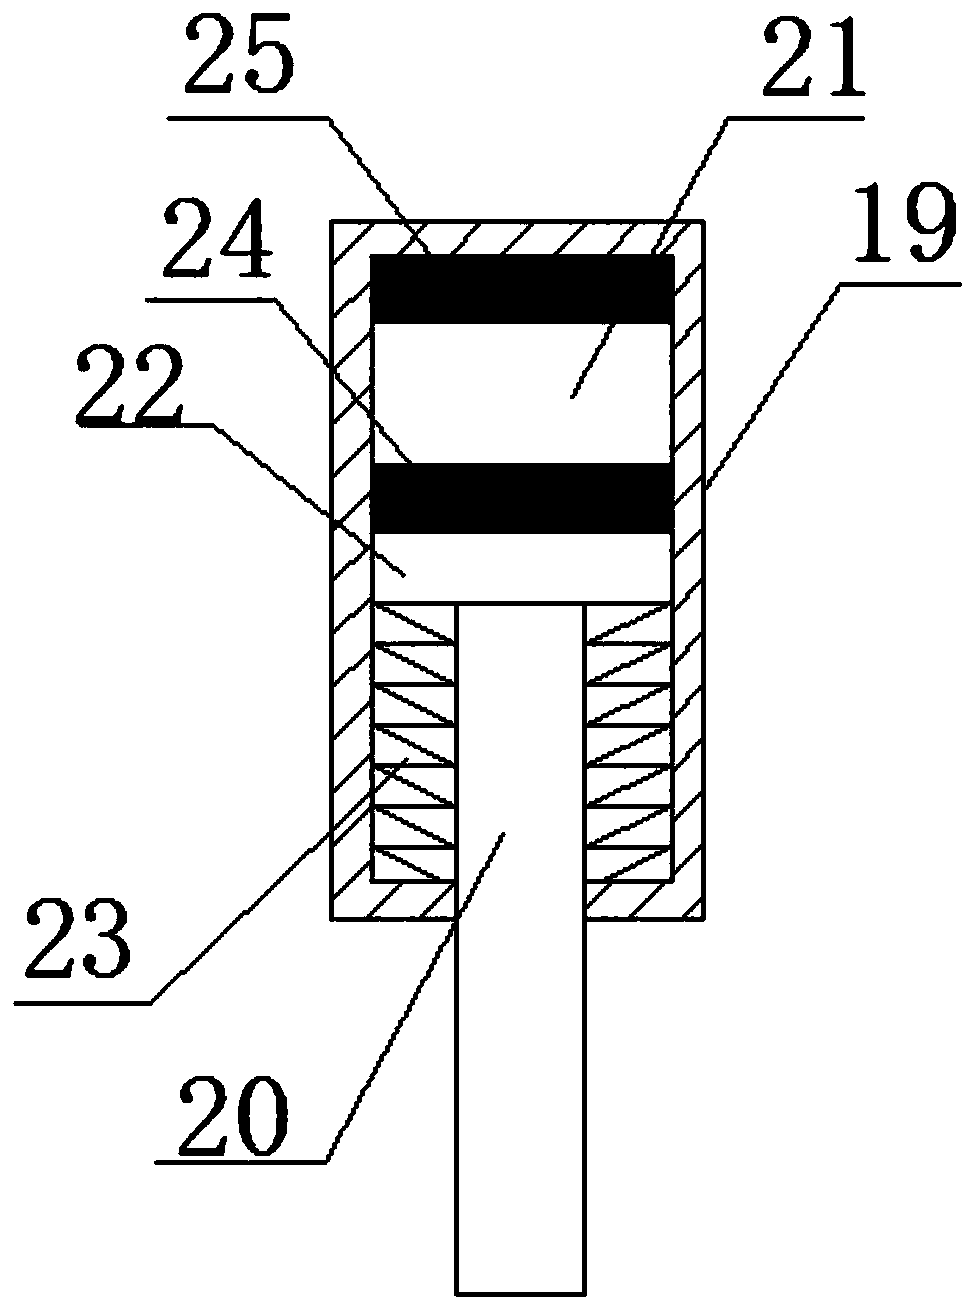 Fabricated building damping structure